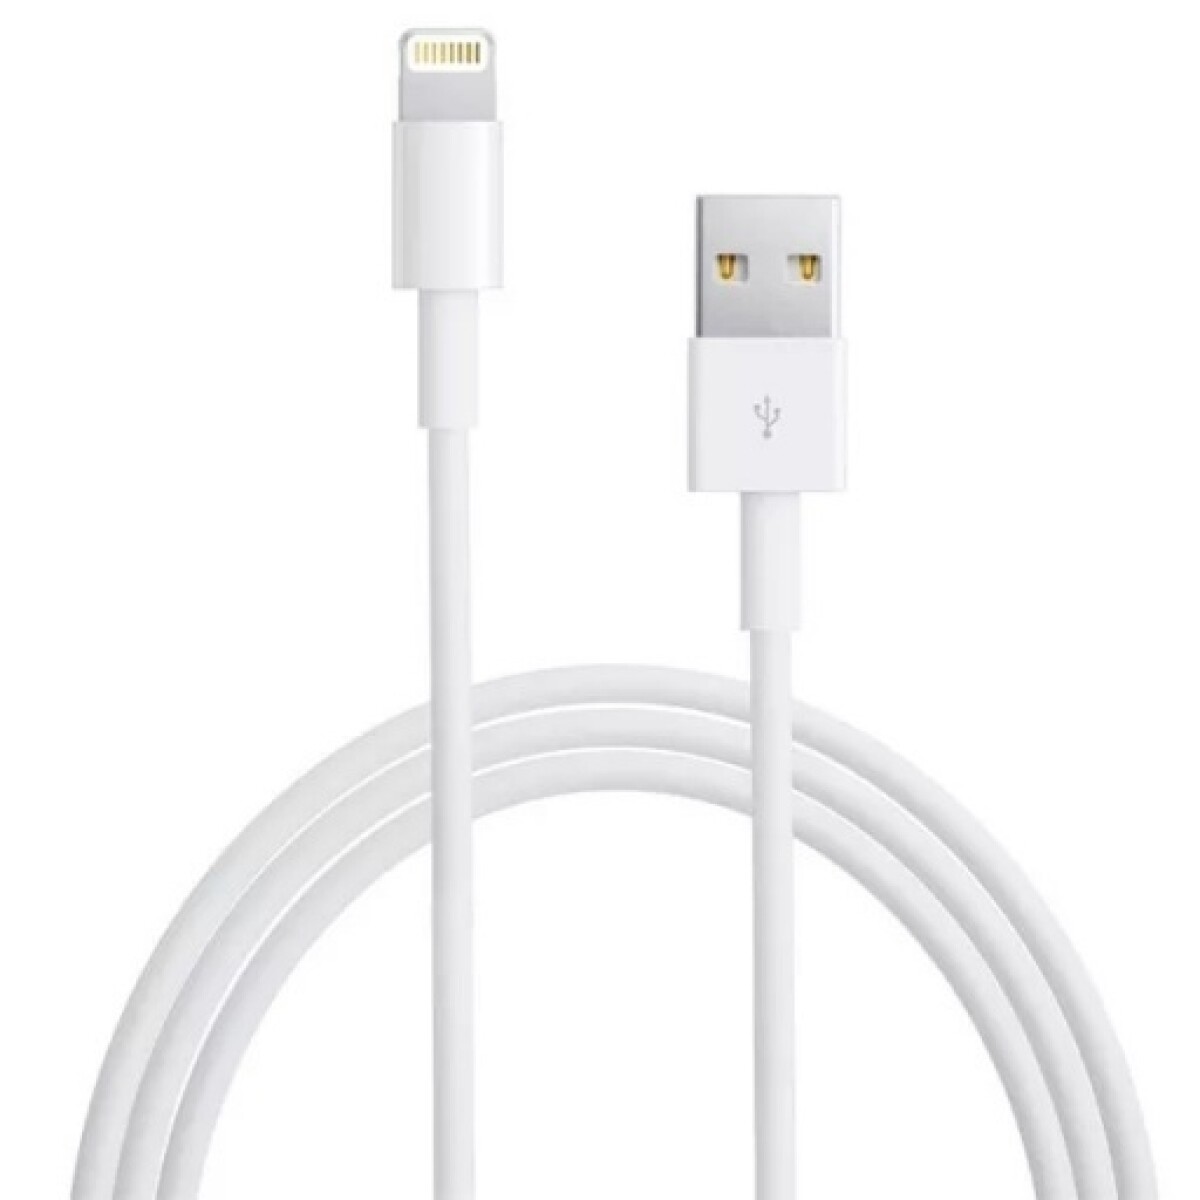 Cable usb compatible lightning a usb-a iphone - Blanco 